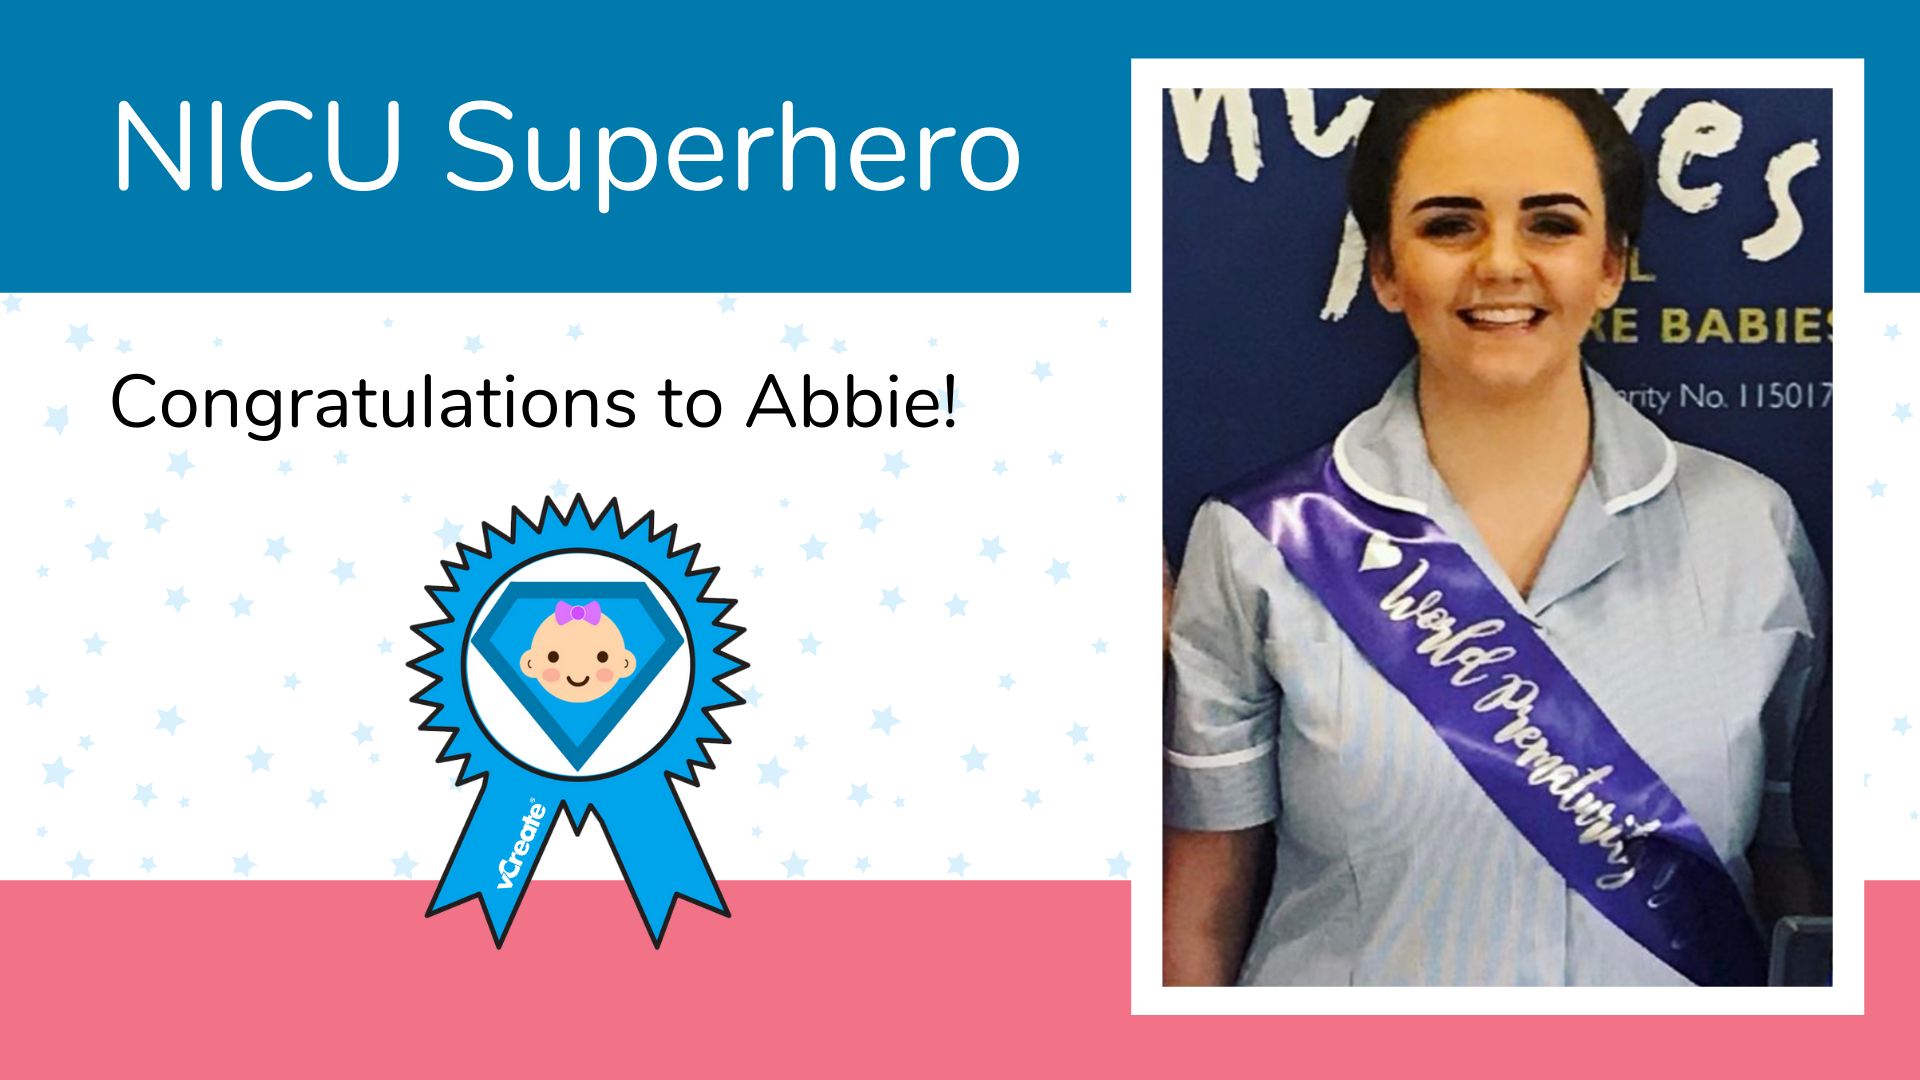 Abbie from the Royal Victoria Infirmary in Newcastle is crowned NICU Superhero!